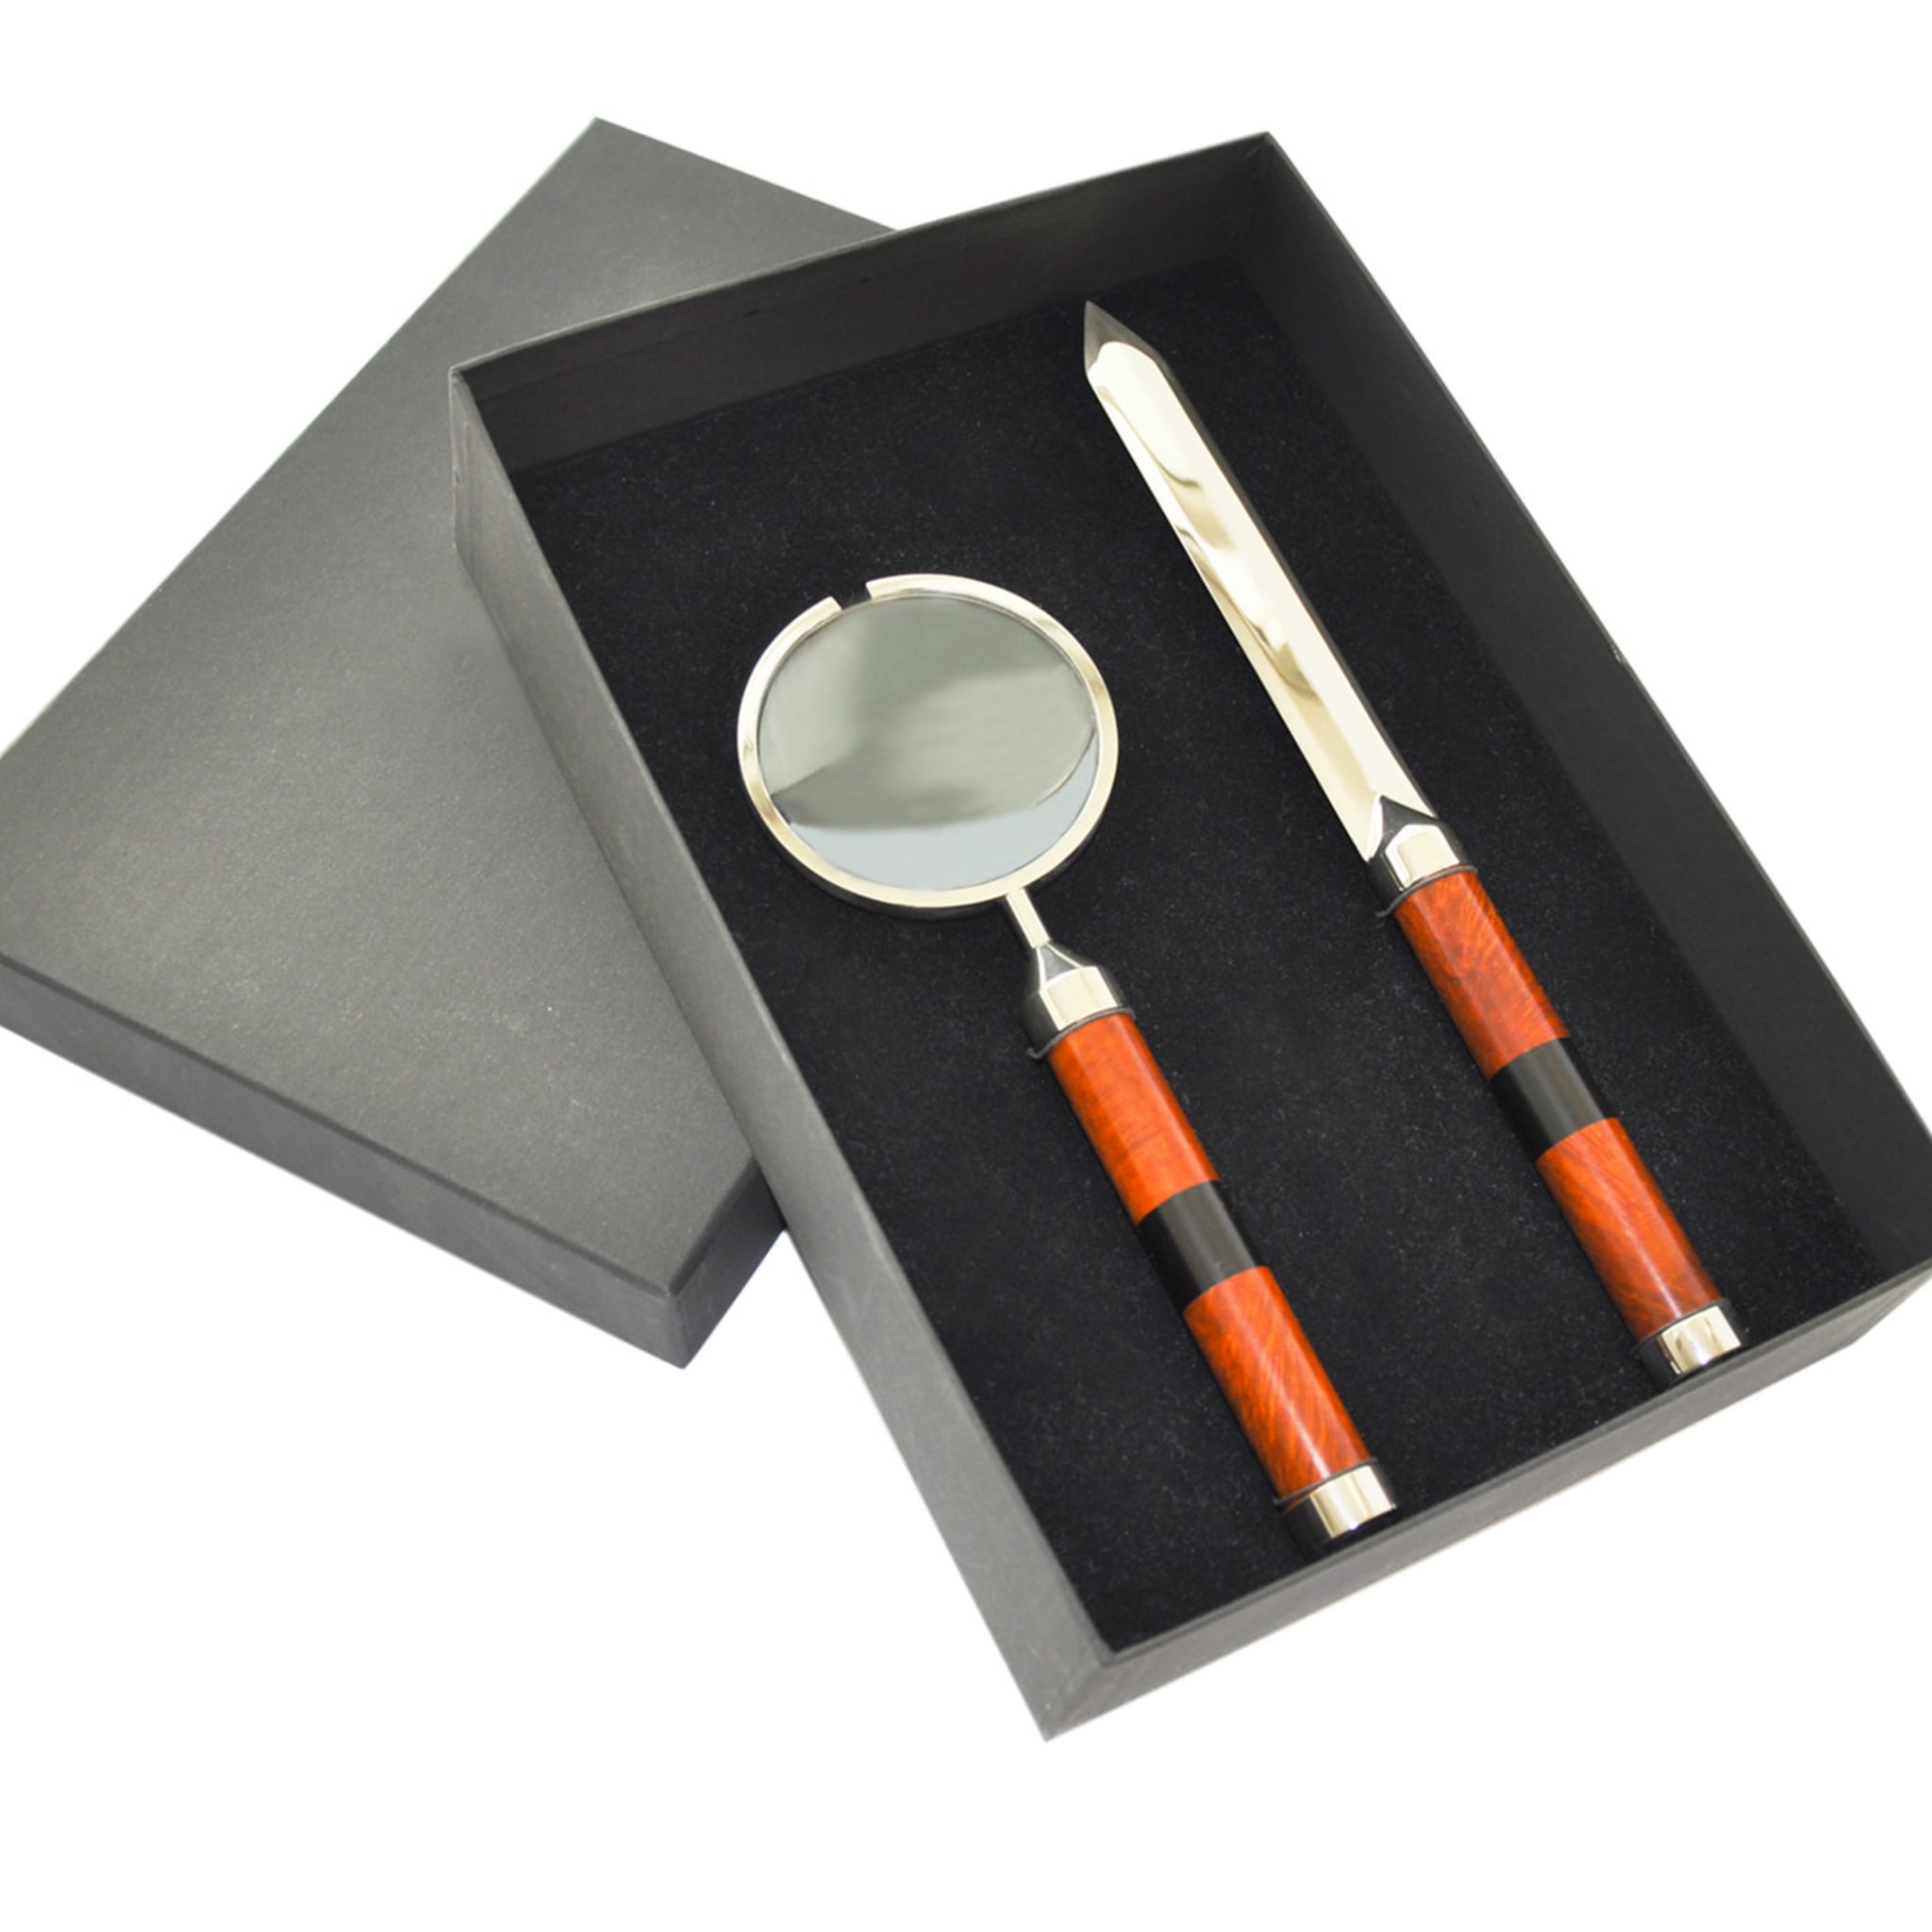 Essenze Magnifying Glass and Letter Opener Set by Nino Basso - Alternative view 1